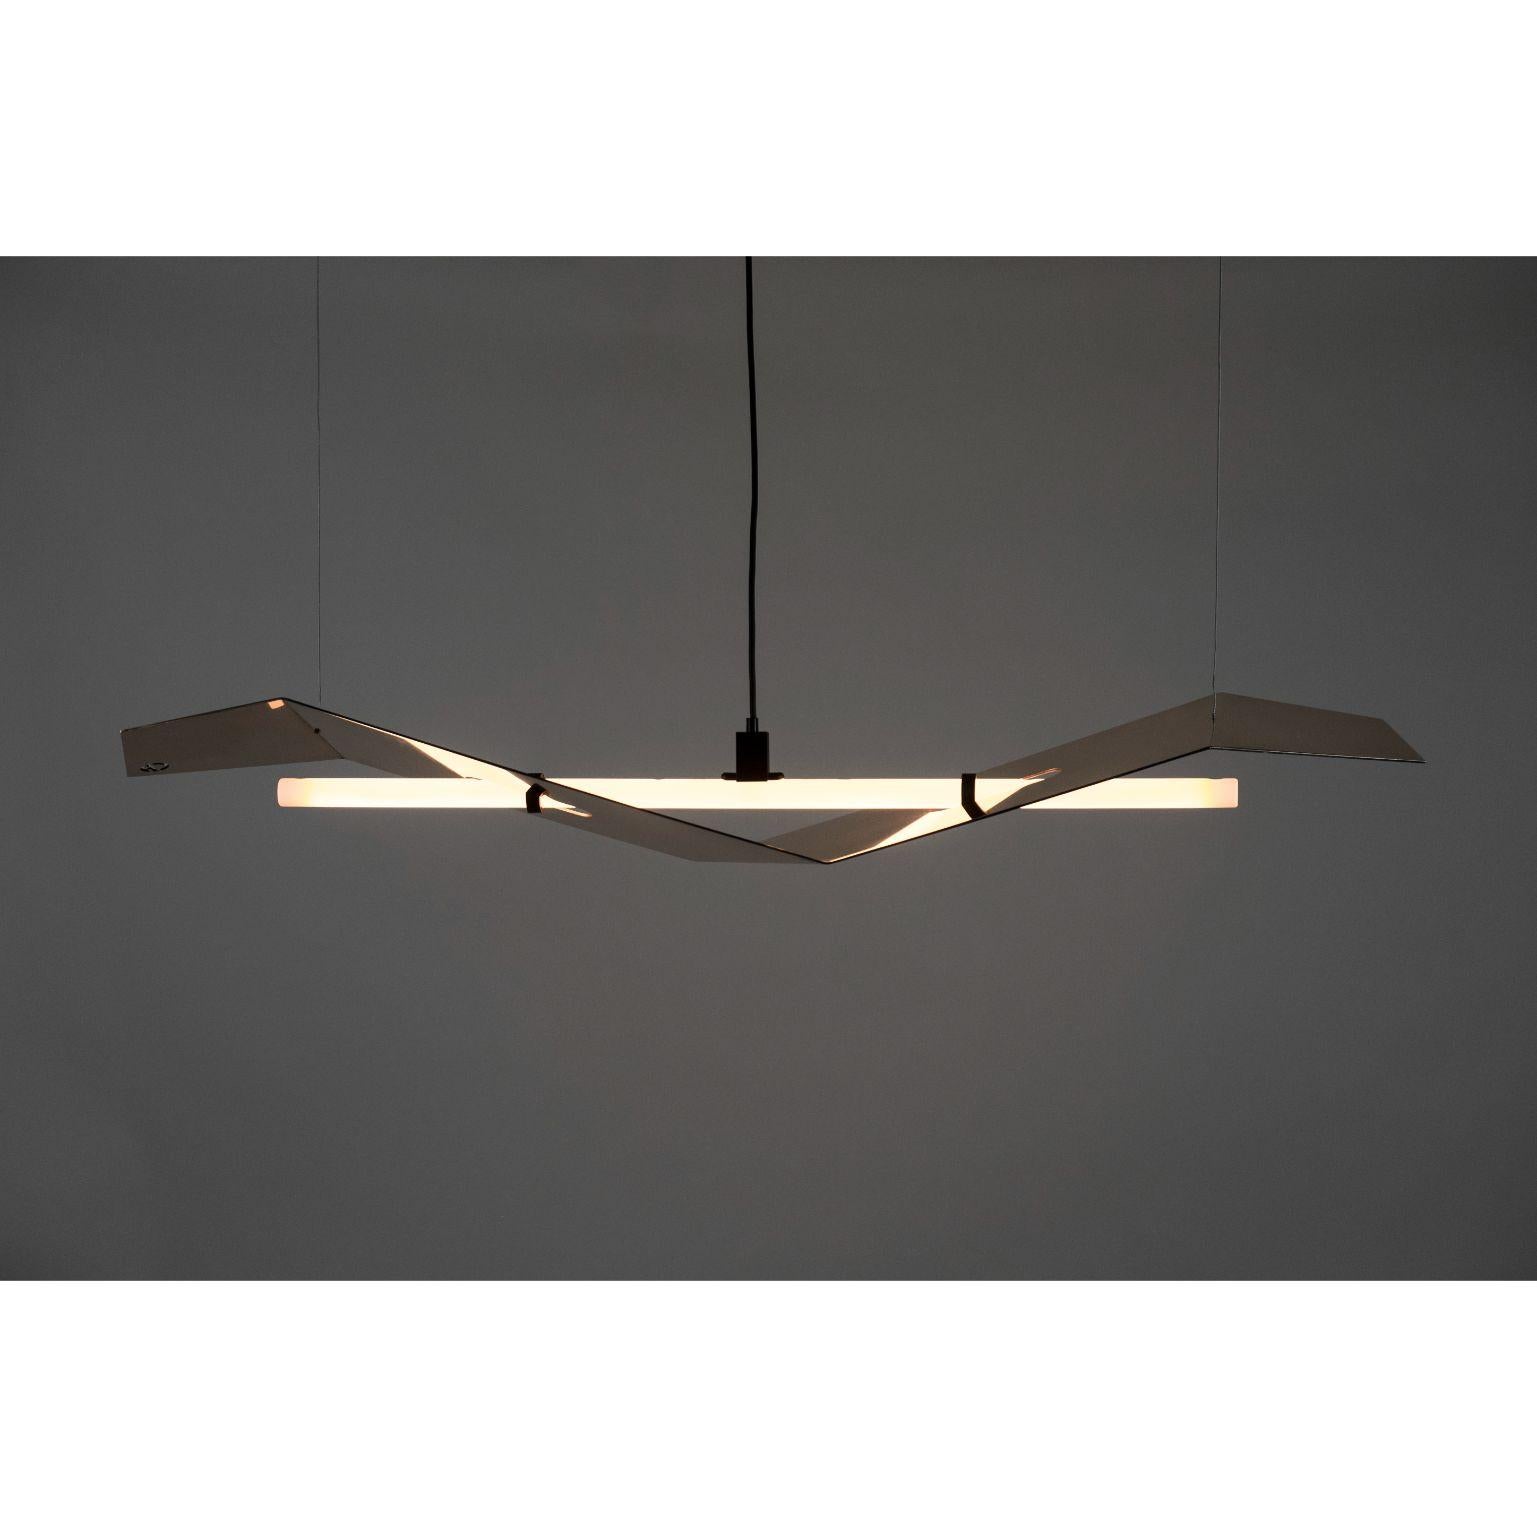 Bird of Prey - Pendant light by Atelier Haute Cuisine
Dimensions: 135 x 25,5 x 18 cm
Materials: Bronze

All our lamps can be wired according to each country. If sold to the USA it will be wired for the USA for instance.
 
A pendant light